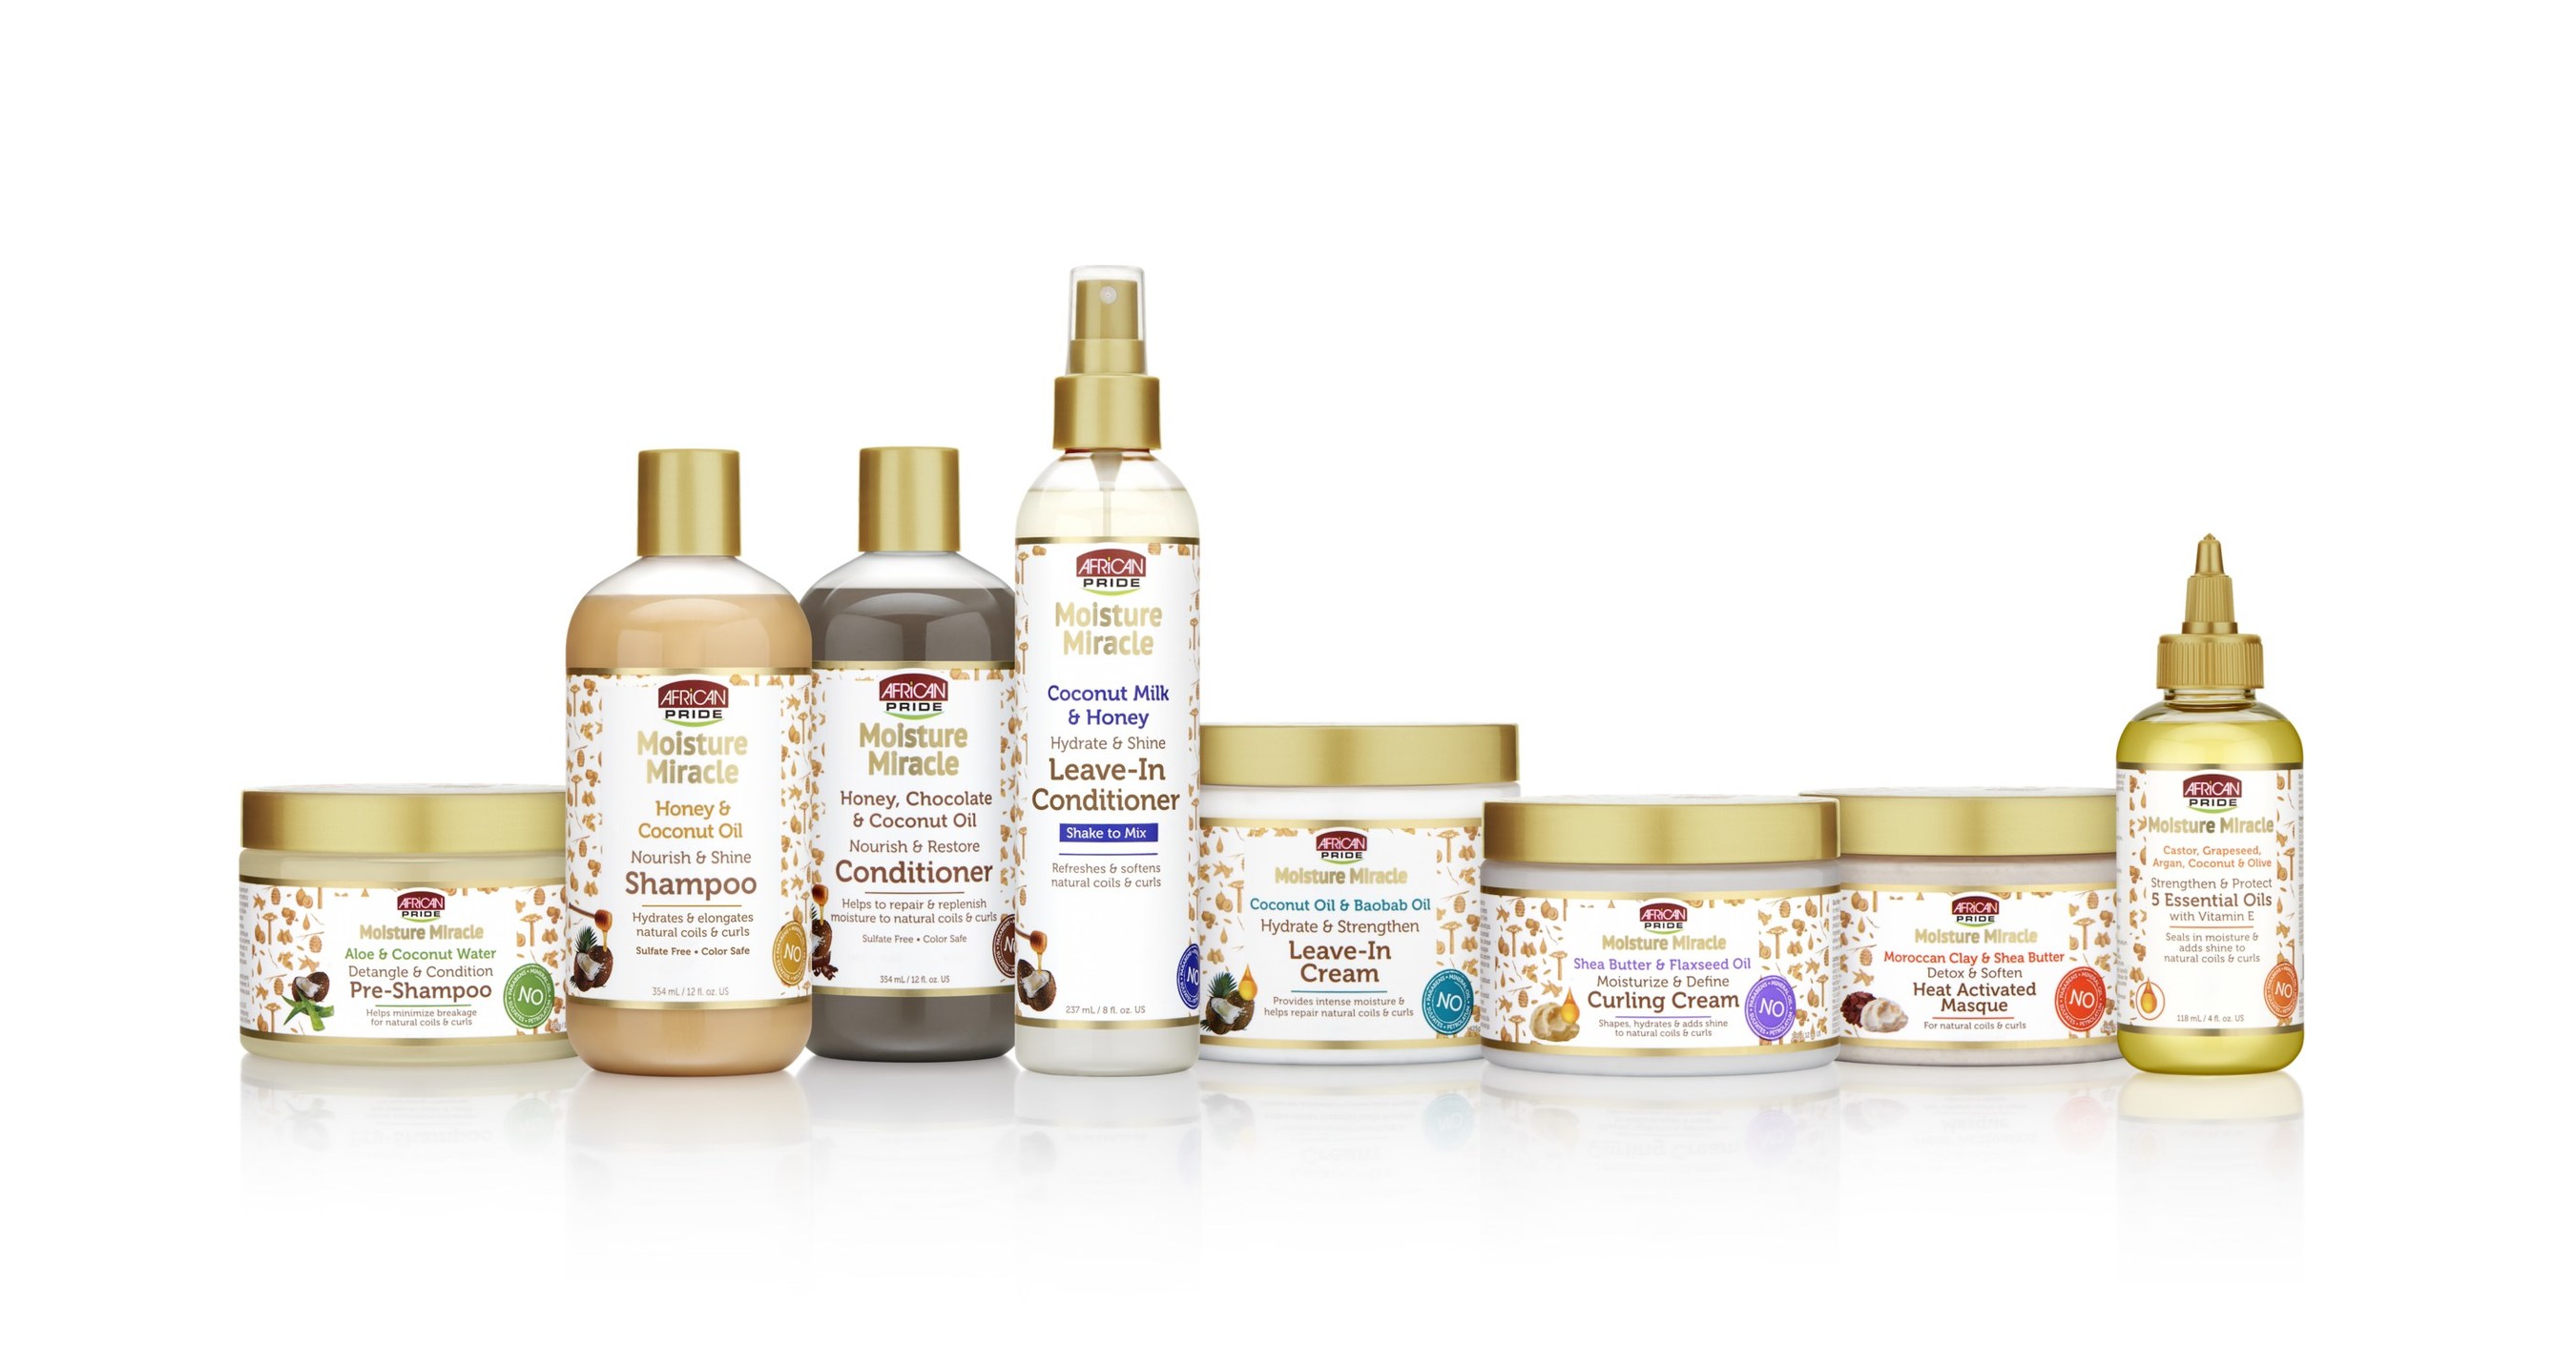 African Pride Launches Moisture Miracle Collection Especially for